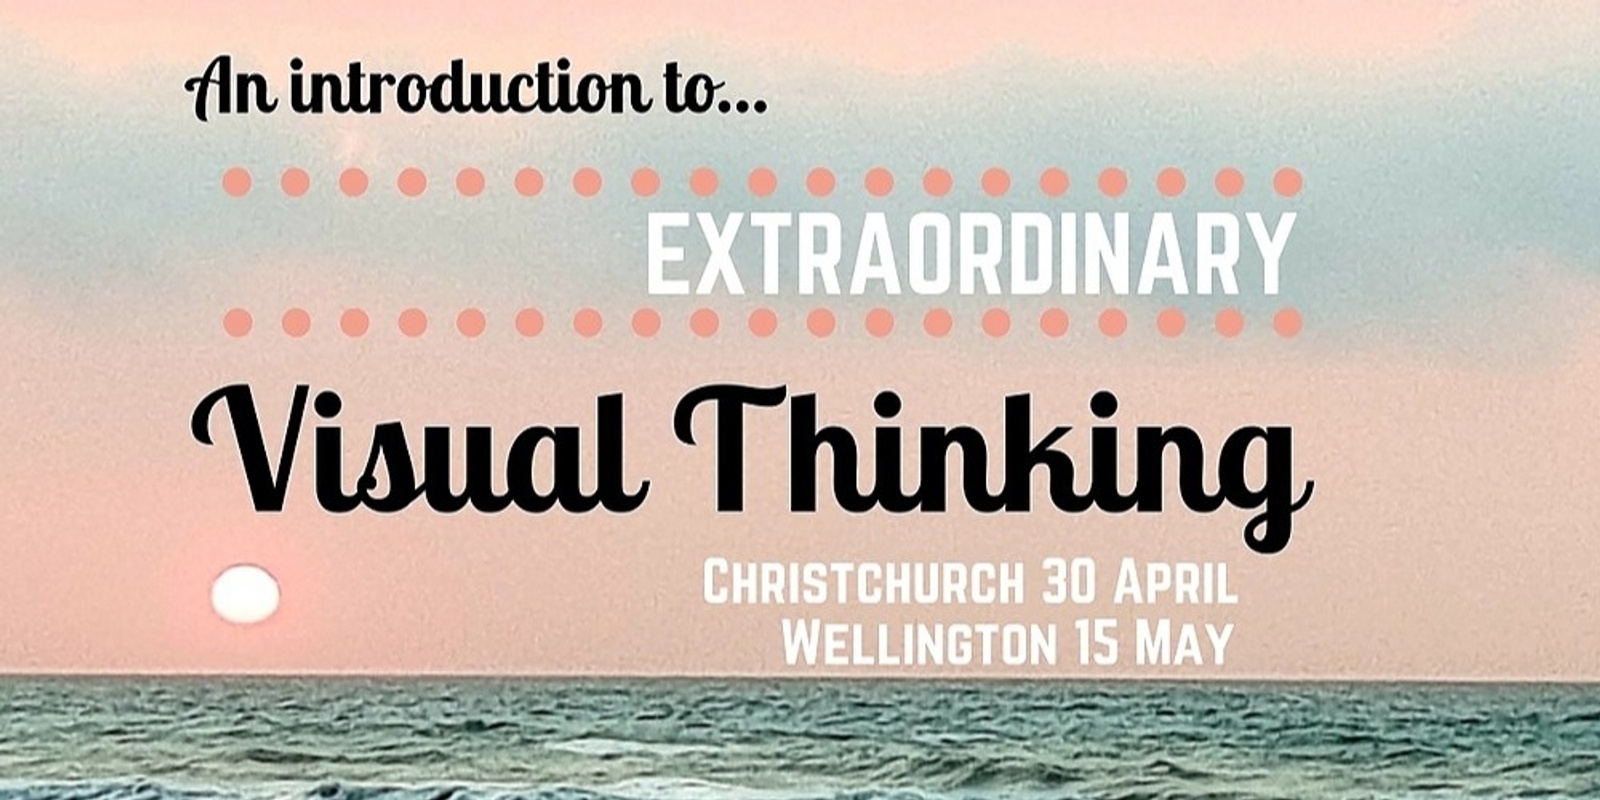 Banner image for Extraordinary Visual Thinking - an introduction - Christchurch